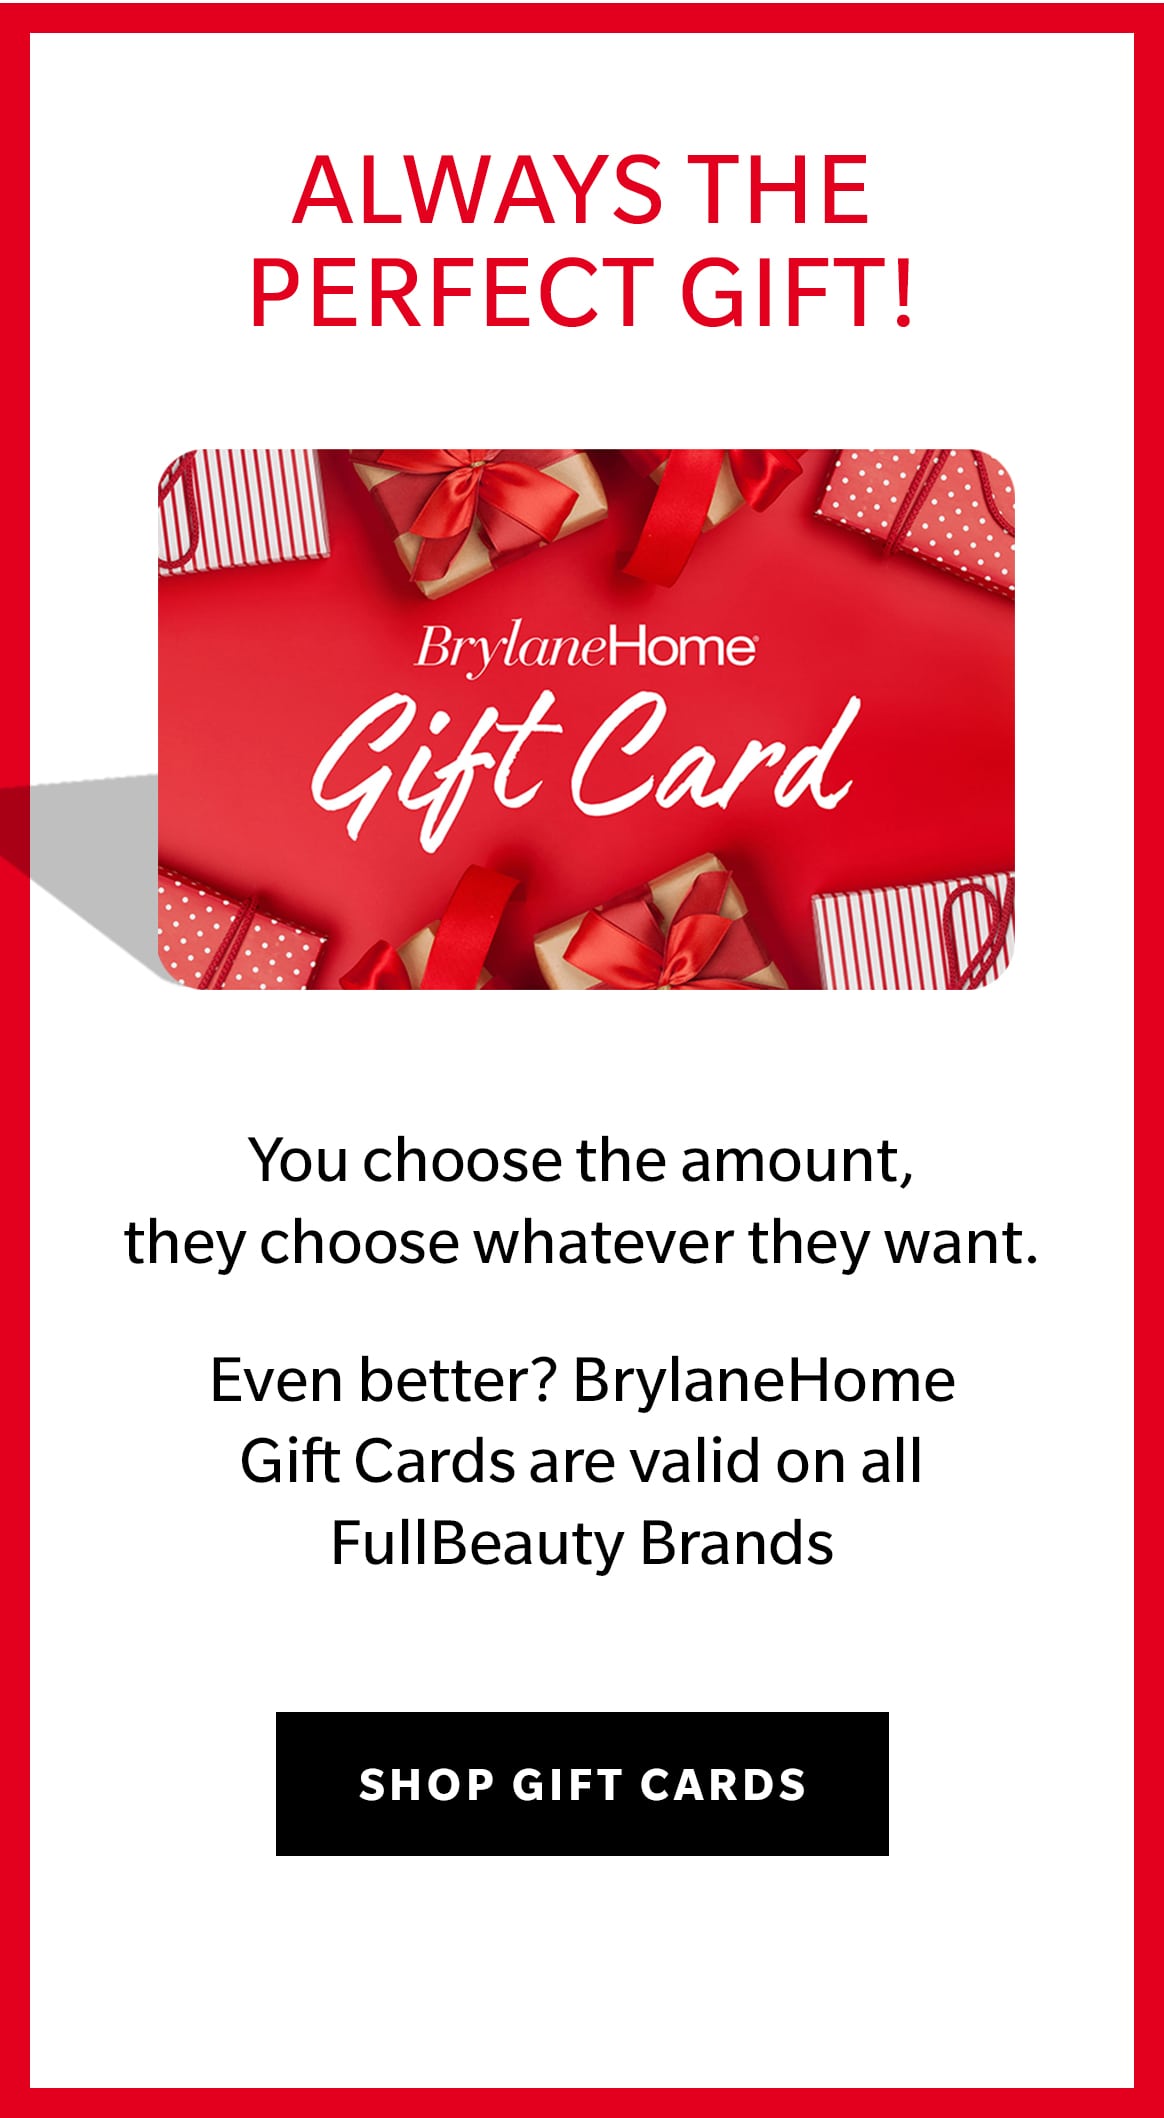 BrylaneHome Gift Card Always the perfect Gift! - SHOP NOW